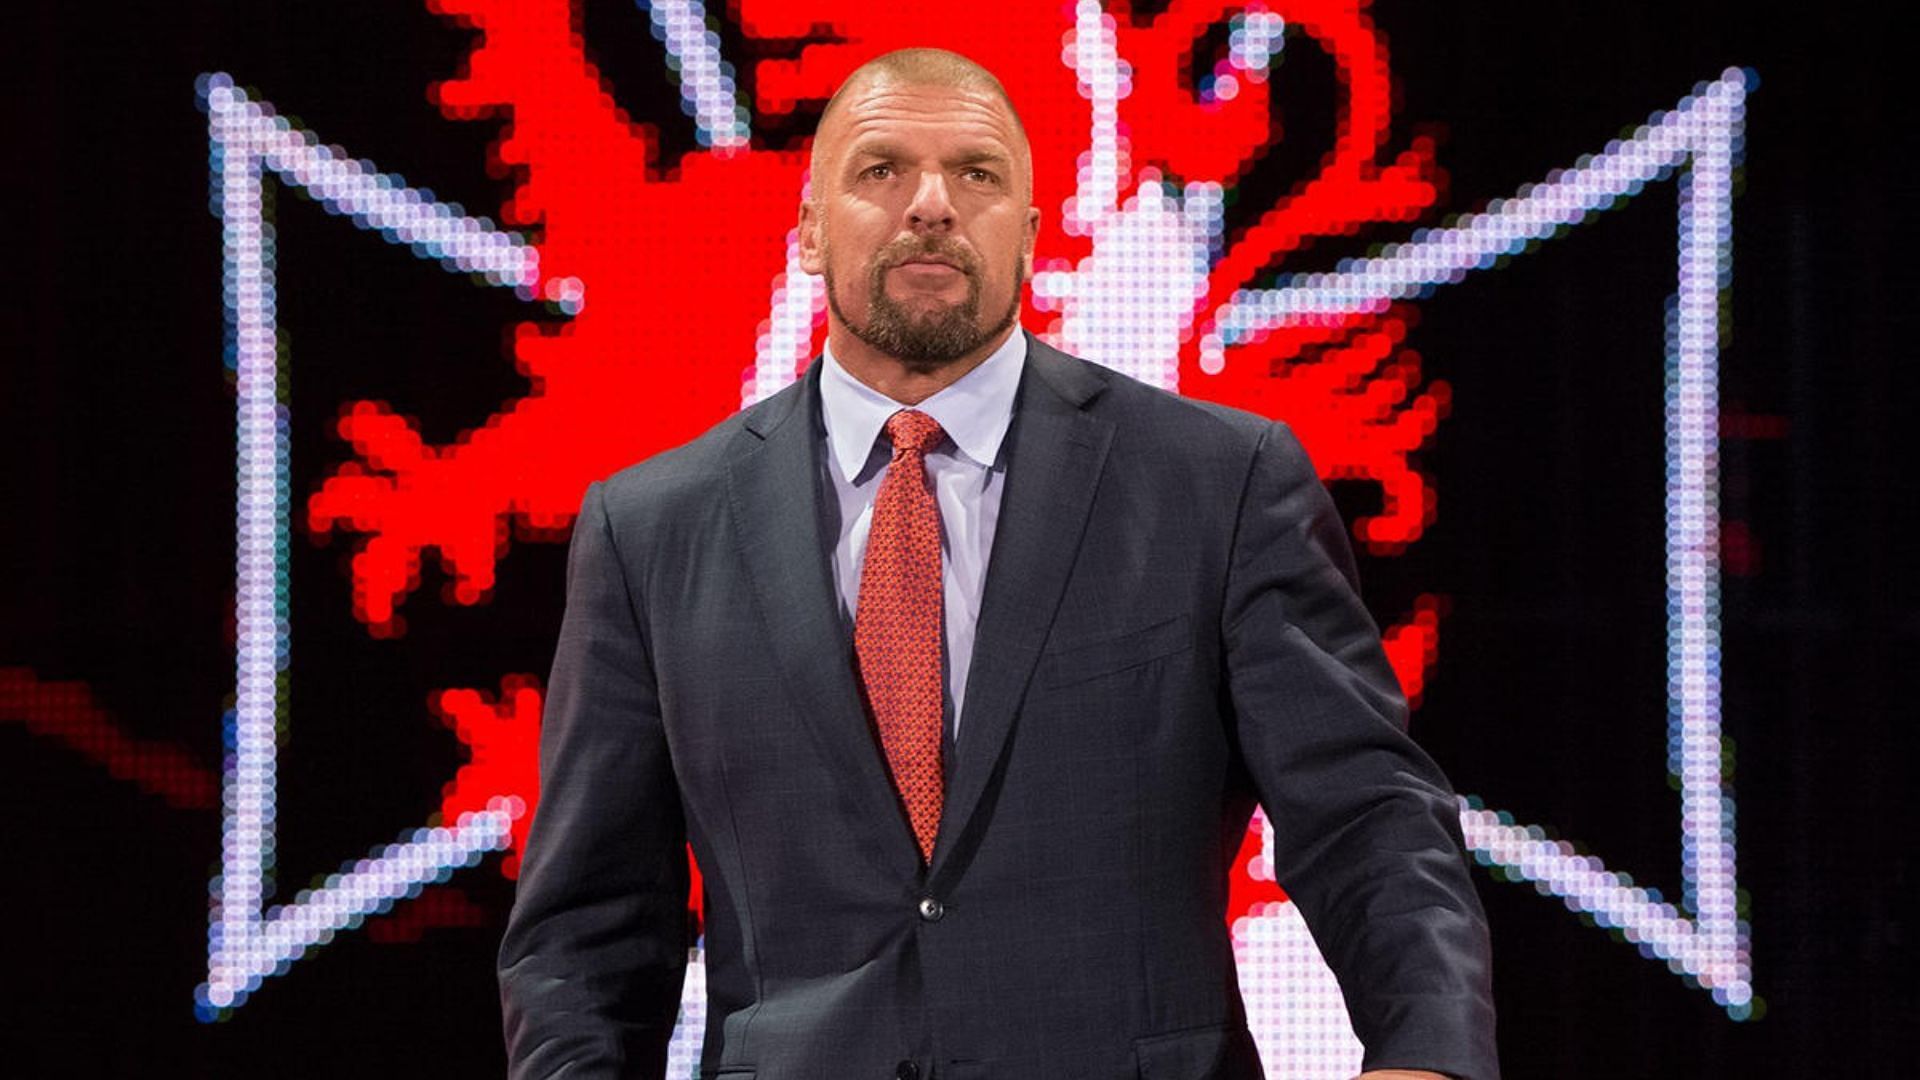 WWE Chief Content Officer and 14-time world champion Triple H